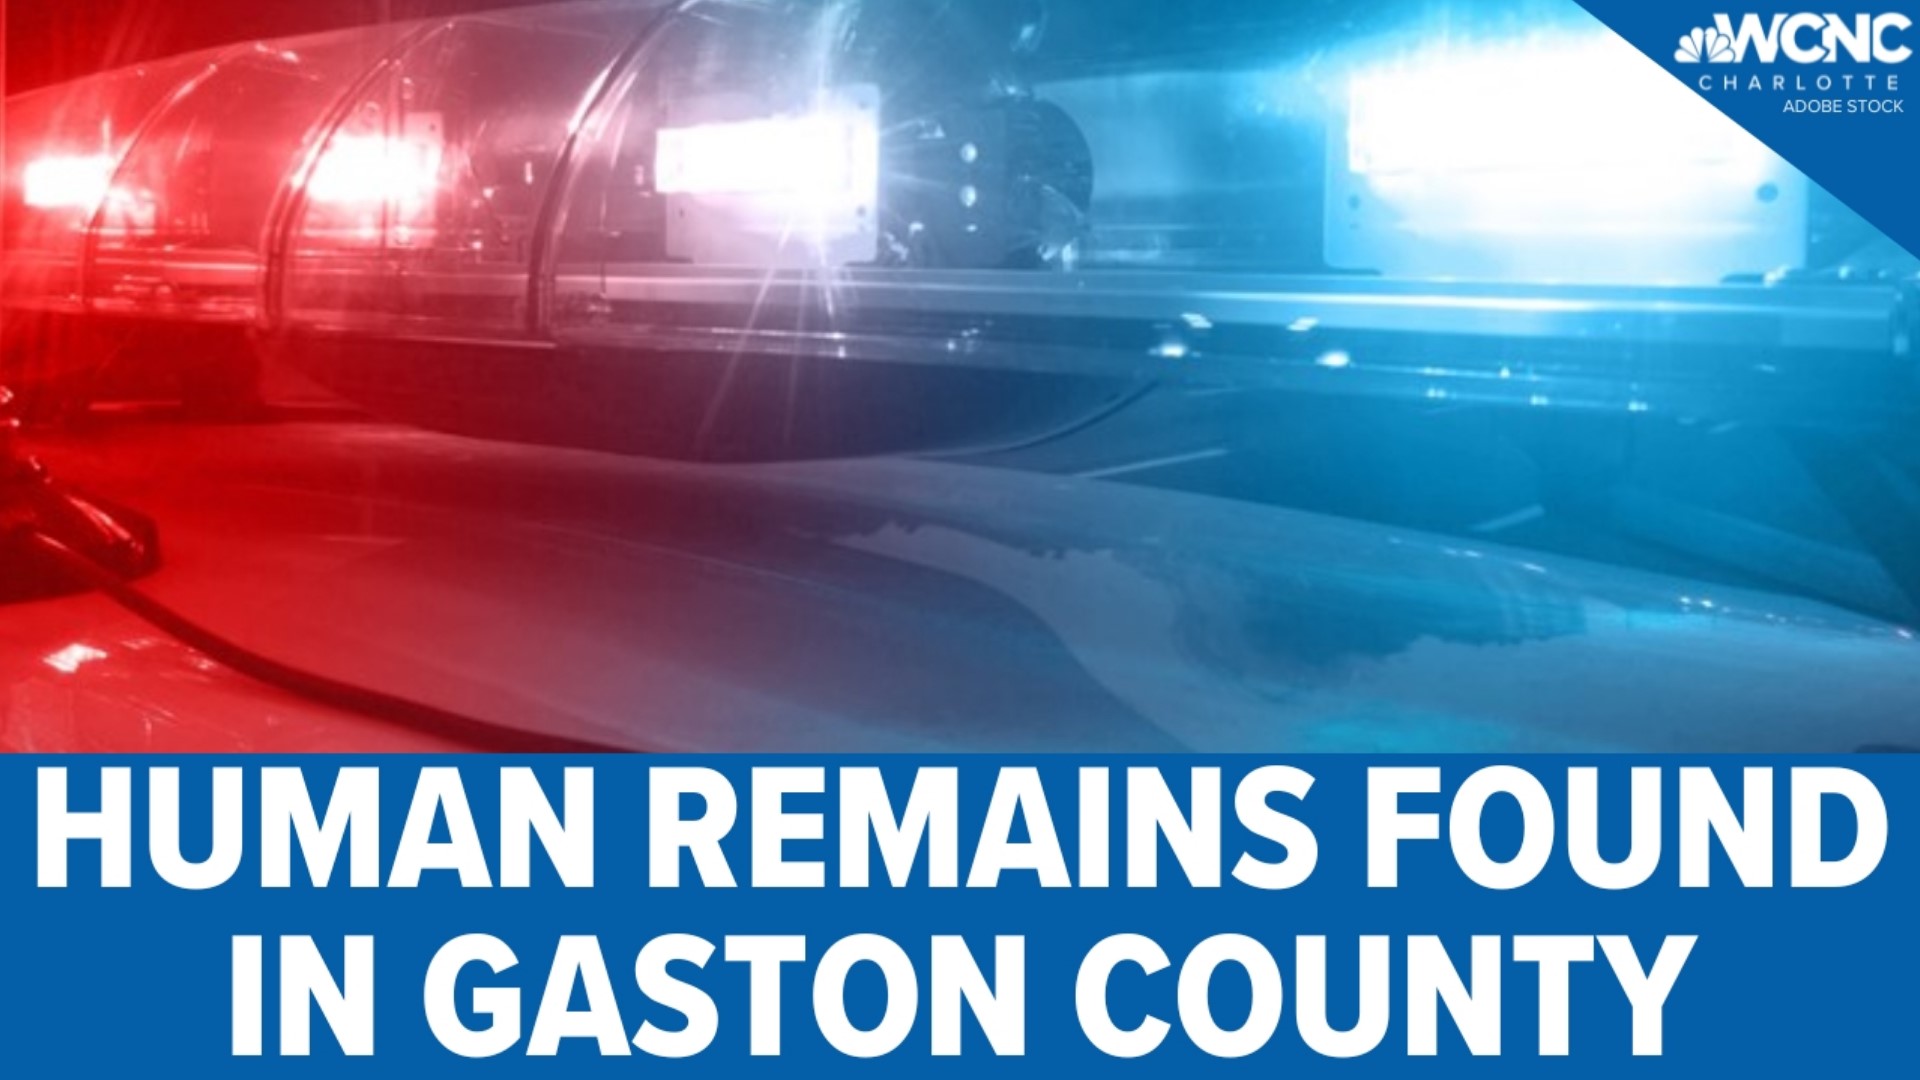 Gaston County Police are investigating after human remains were discovered Wednesday morning.